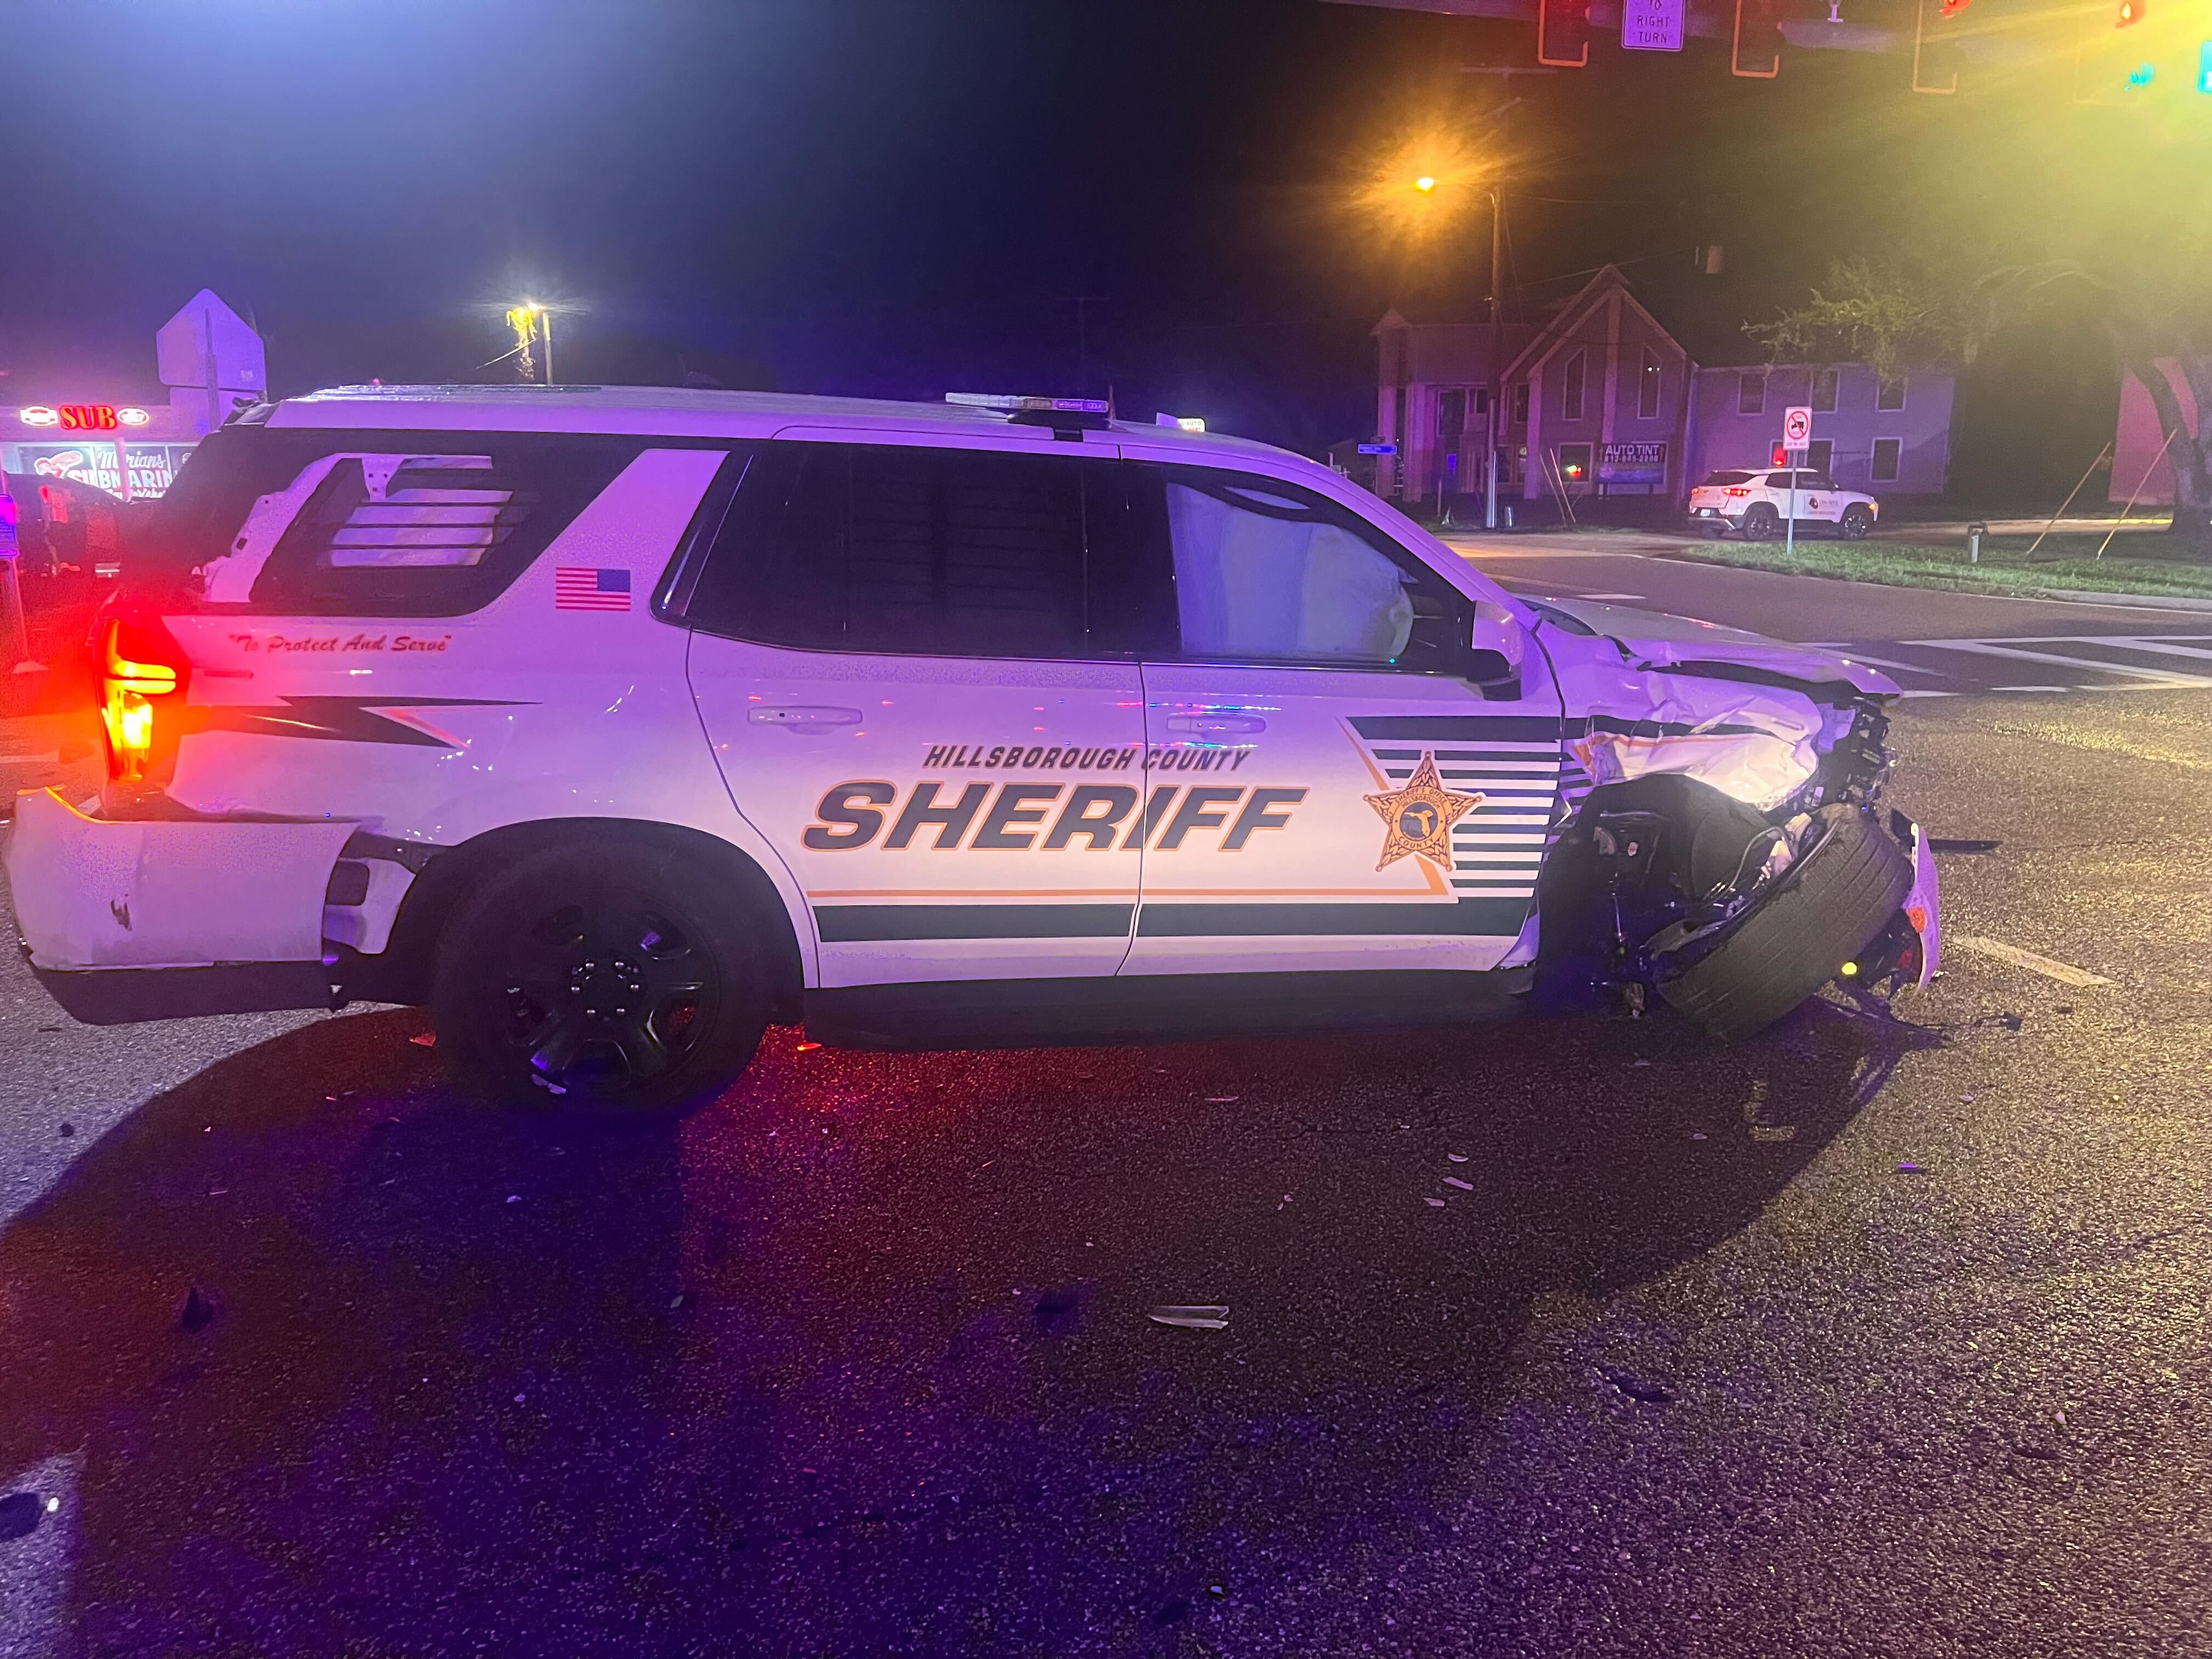 DRIVER CHARGED WITH DUI AFTER CRASHING INTO DEPUTY